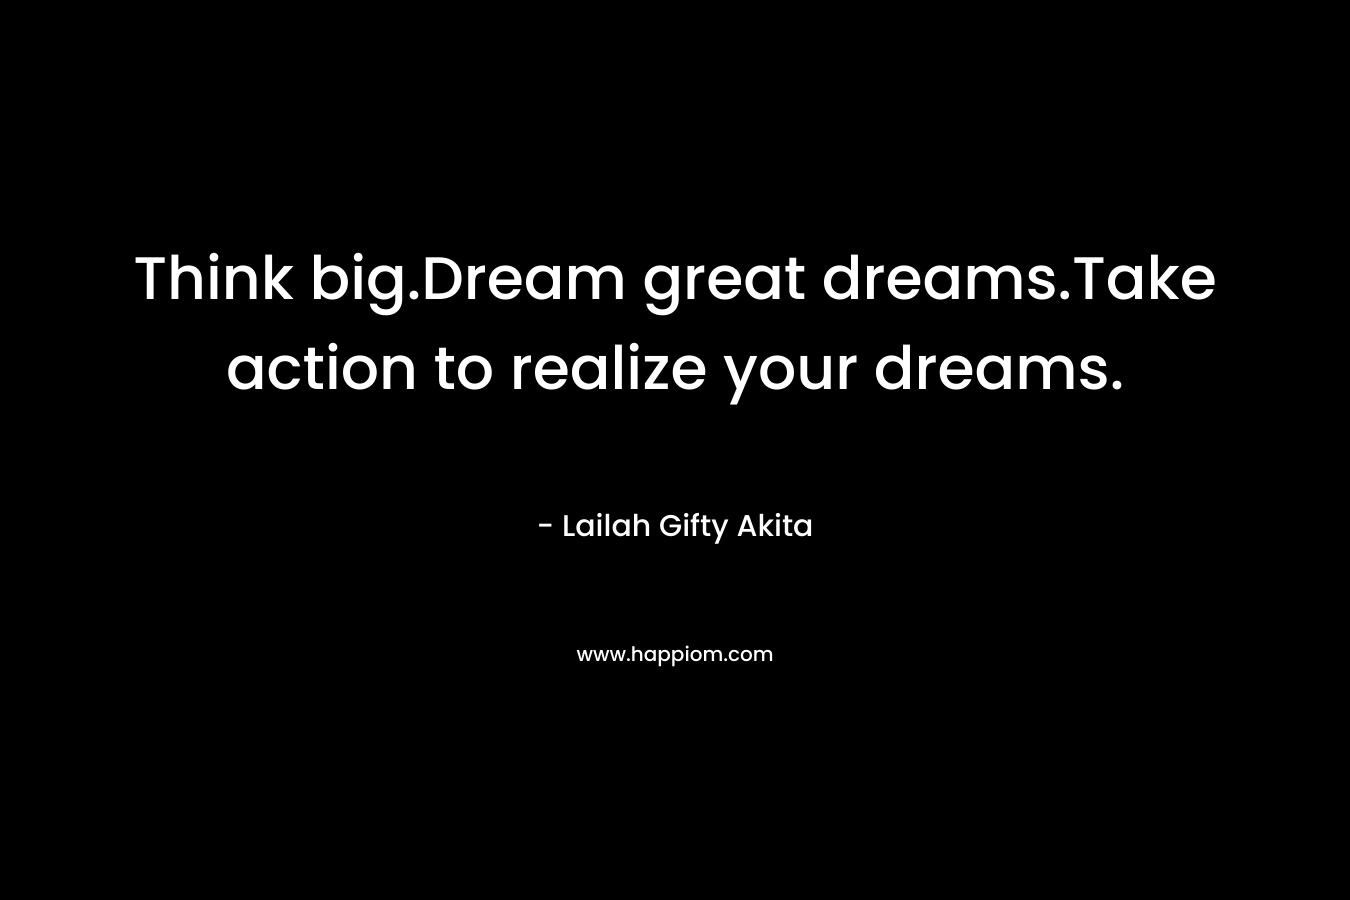 Think big.Dream great dreams.Take action to realize your dreams.